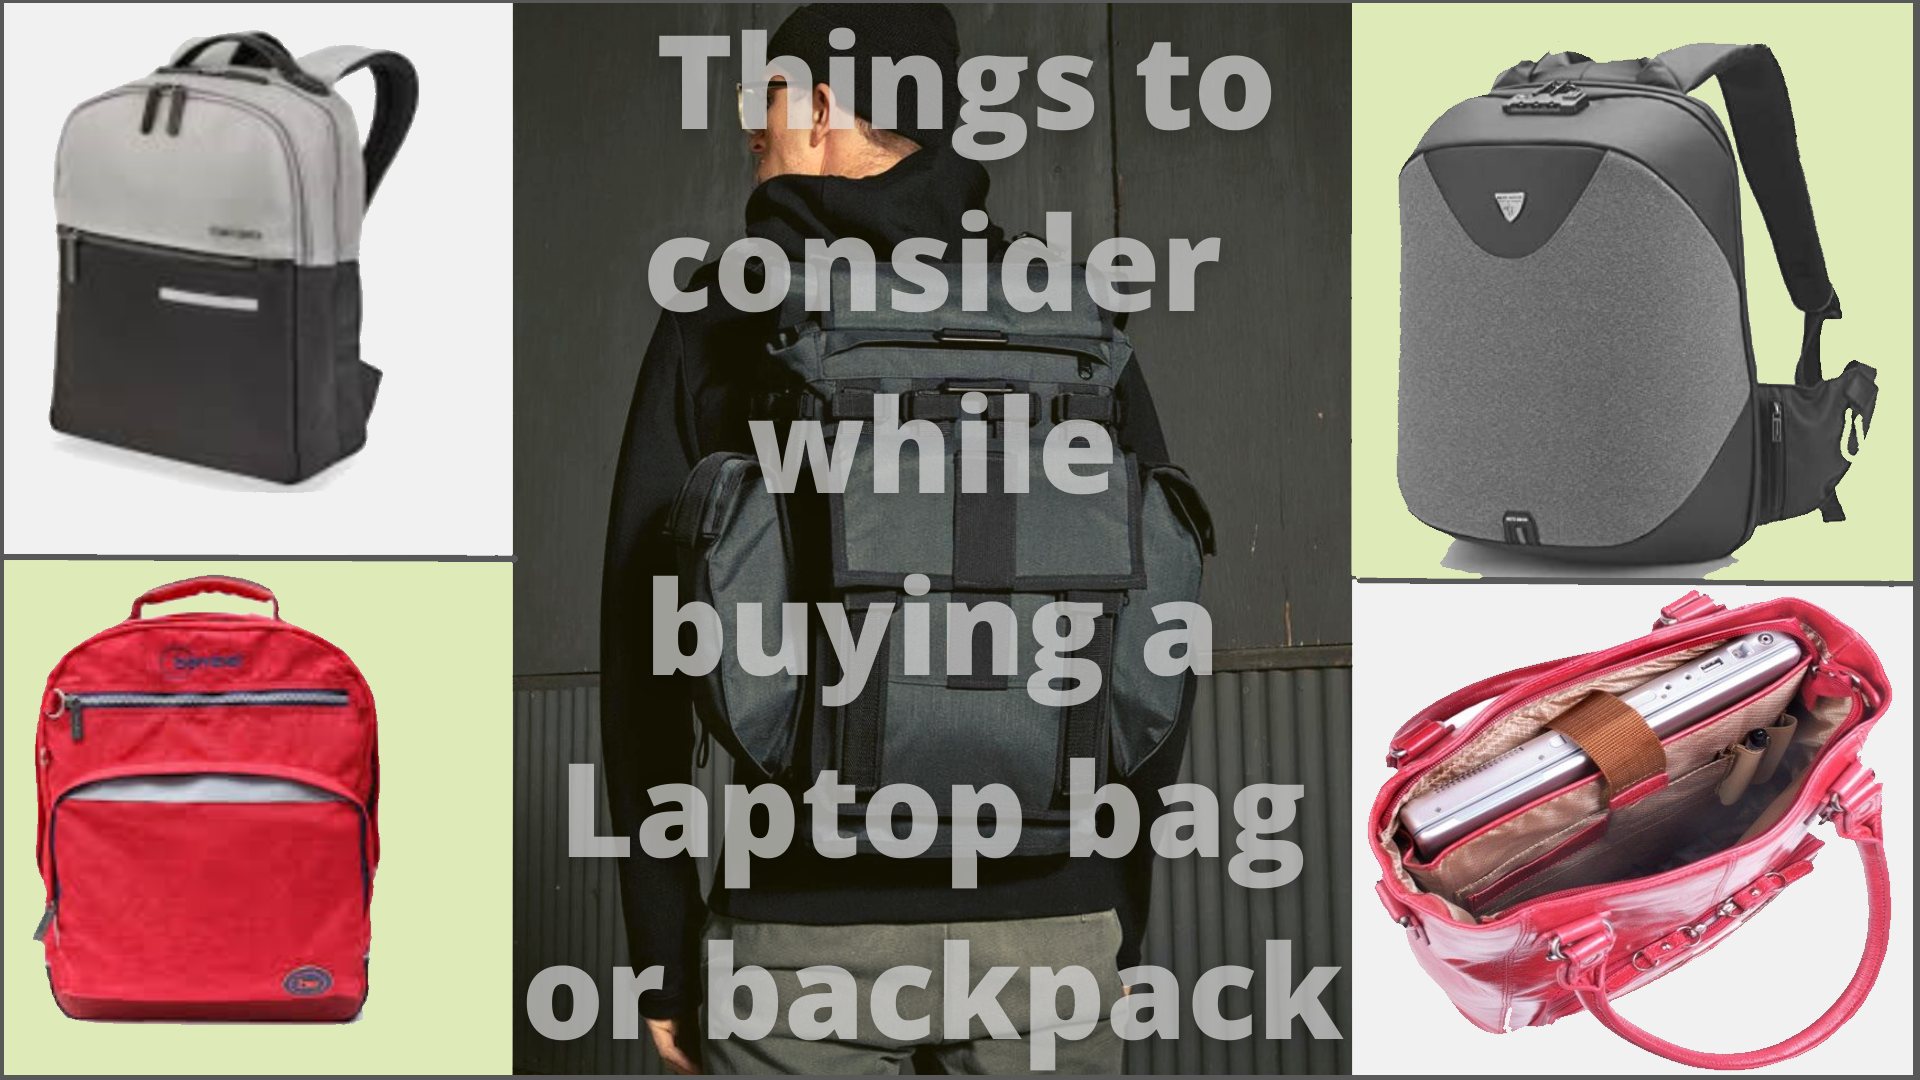 How to select an appropriate laptop bag for you.